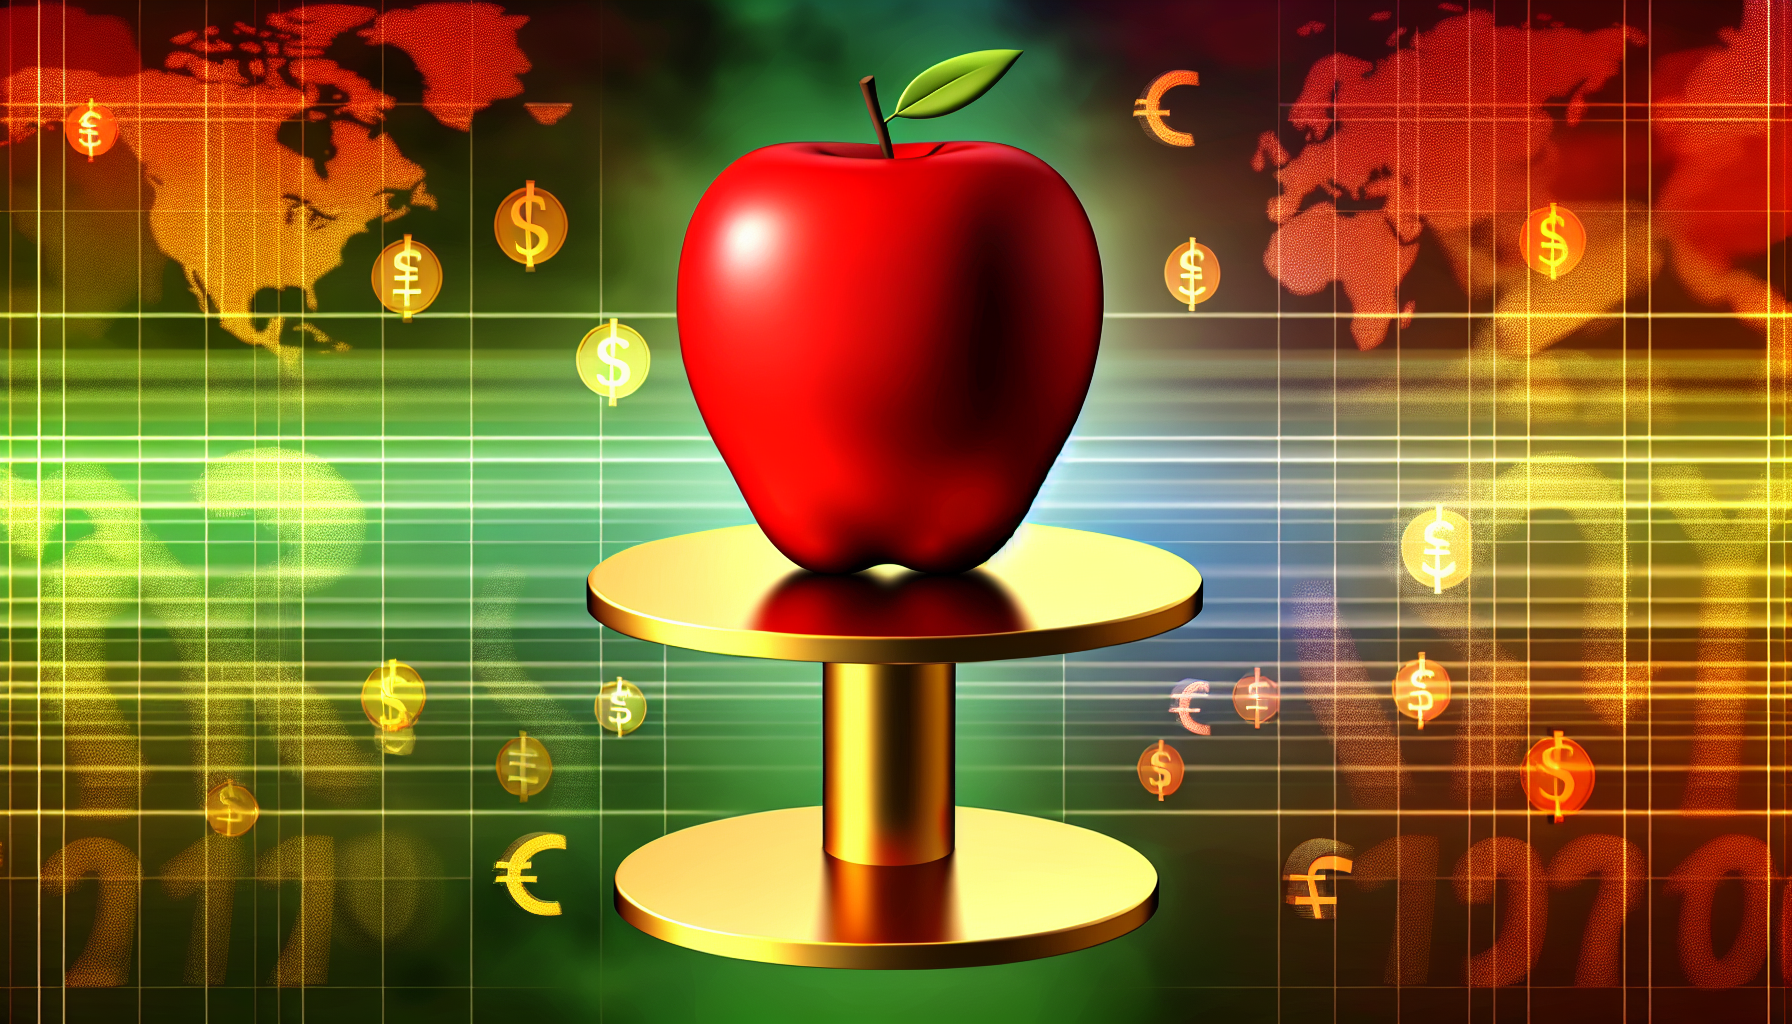 Apple surpasses rivals to become the world's most valuable company